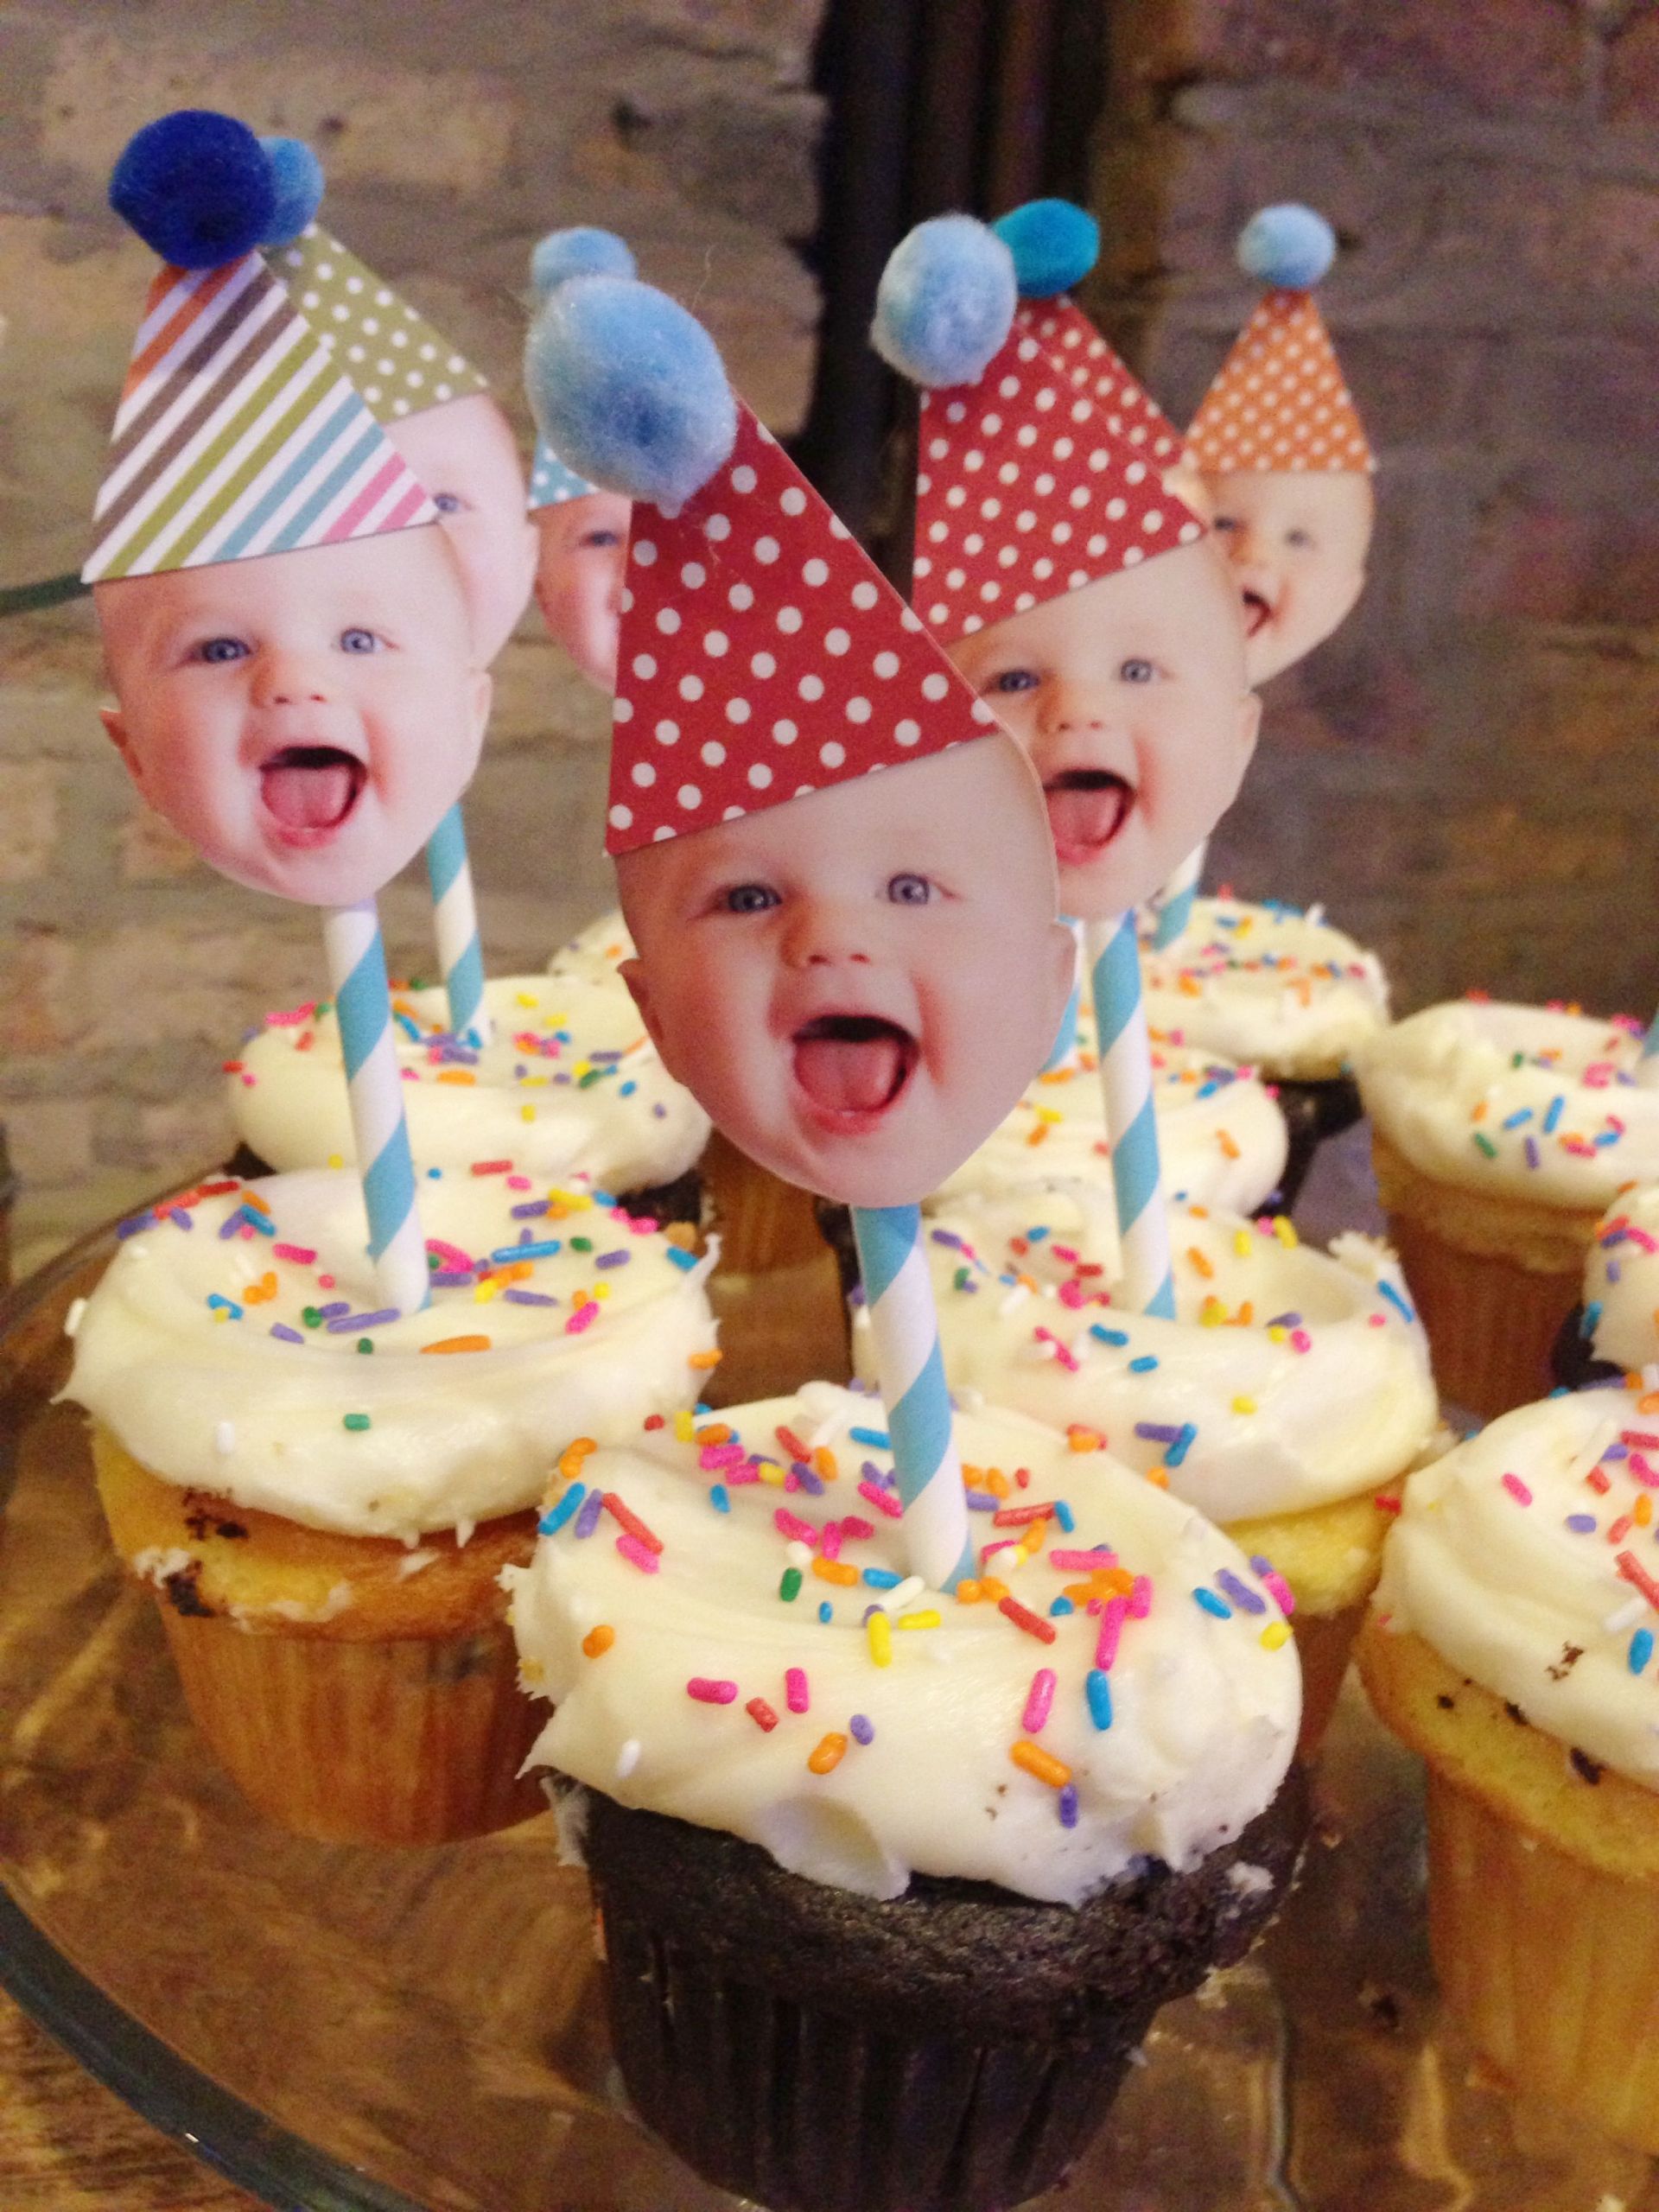 First Birthday Cake Decorating Ideas
 Easiest DIY Cupcake Toppers for a first birthday party